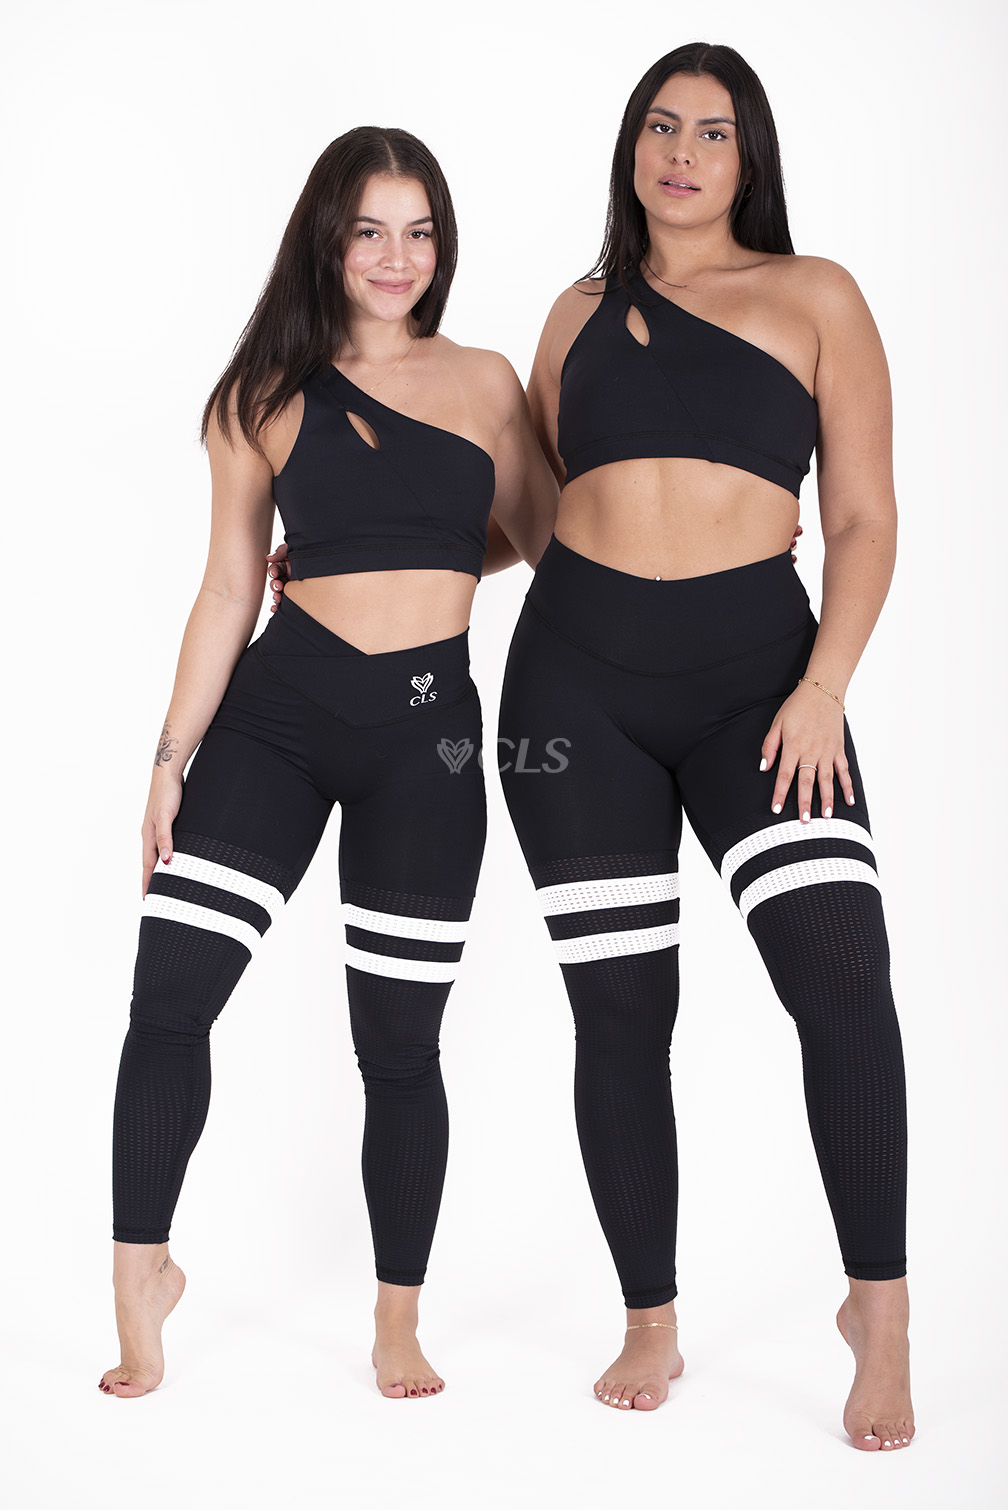 Create Your Own Seamless Front Striped Leggings Additional Colors  (Custom-Made) – CLS Sportswear